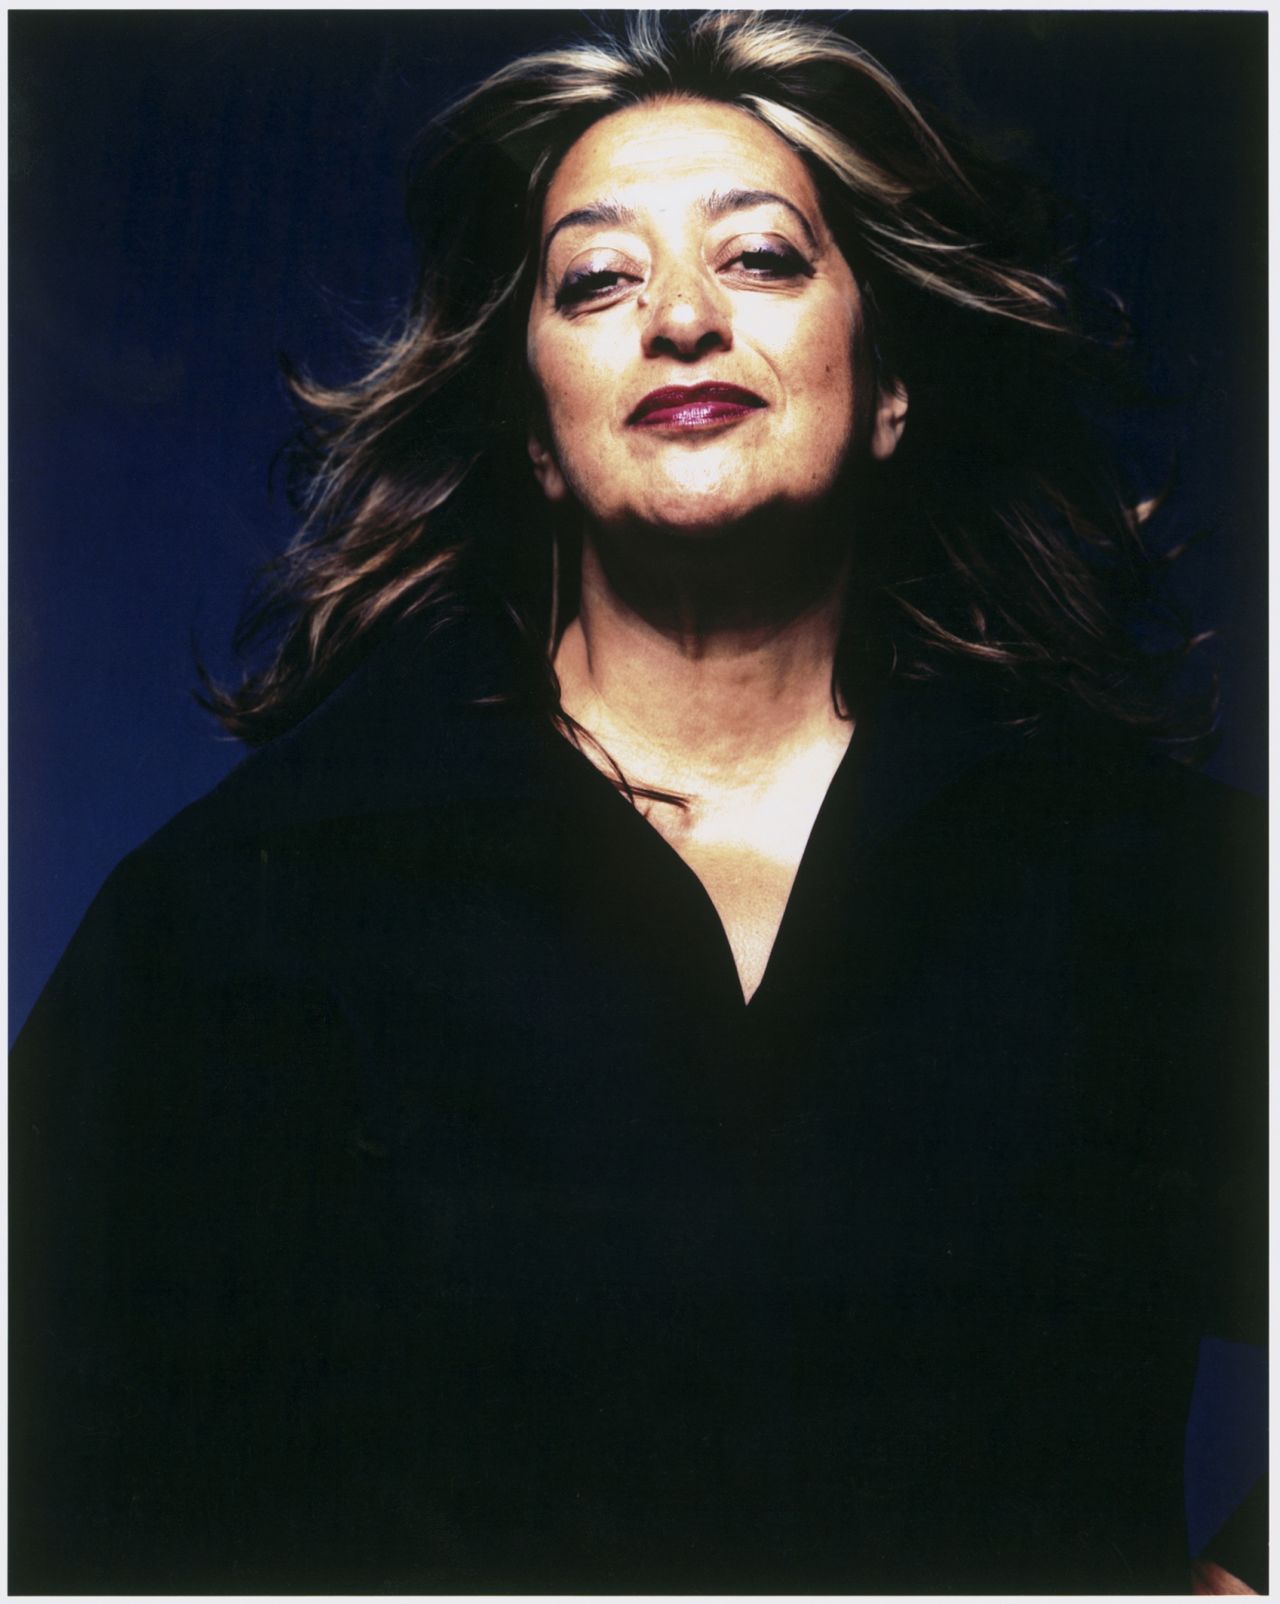 Iraqi-born Zaha Hadid is one of the greatest living architects, and the first woman to win the Pritzker Prize.